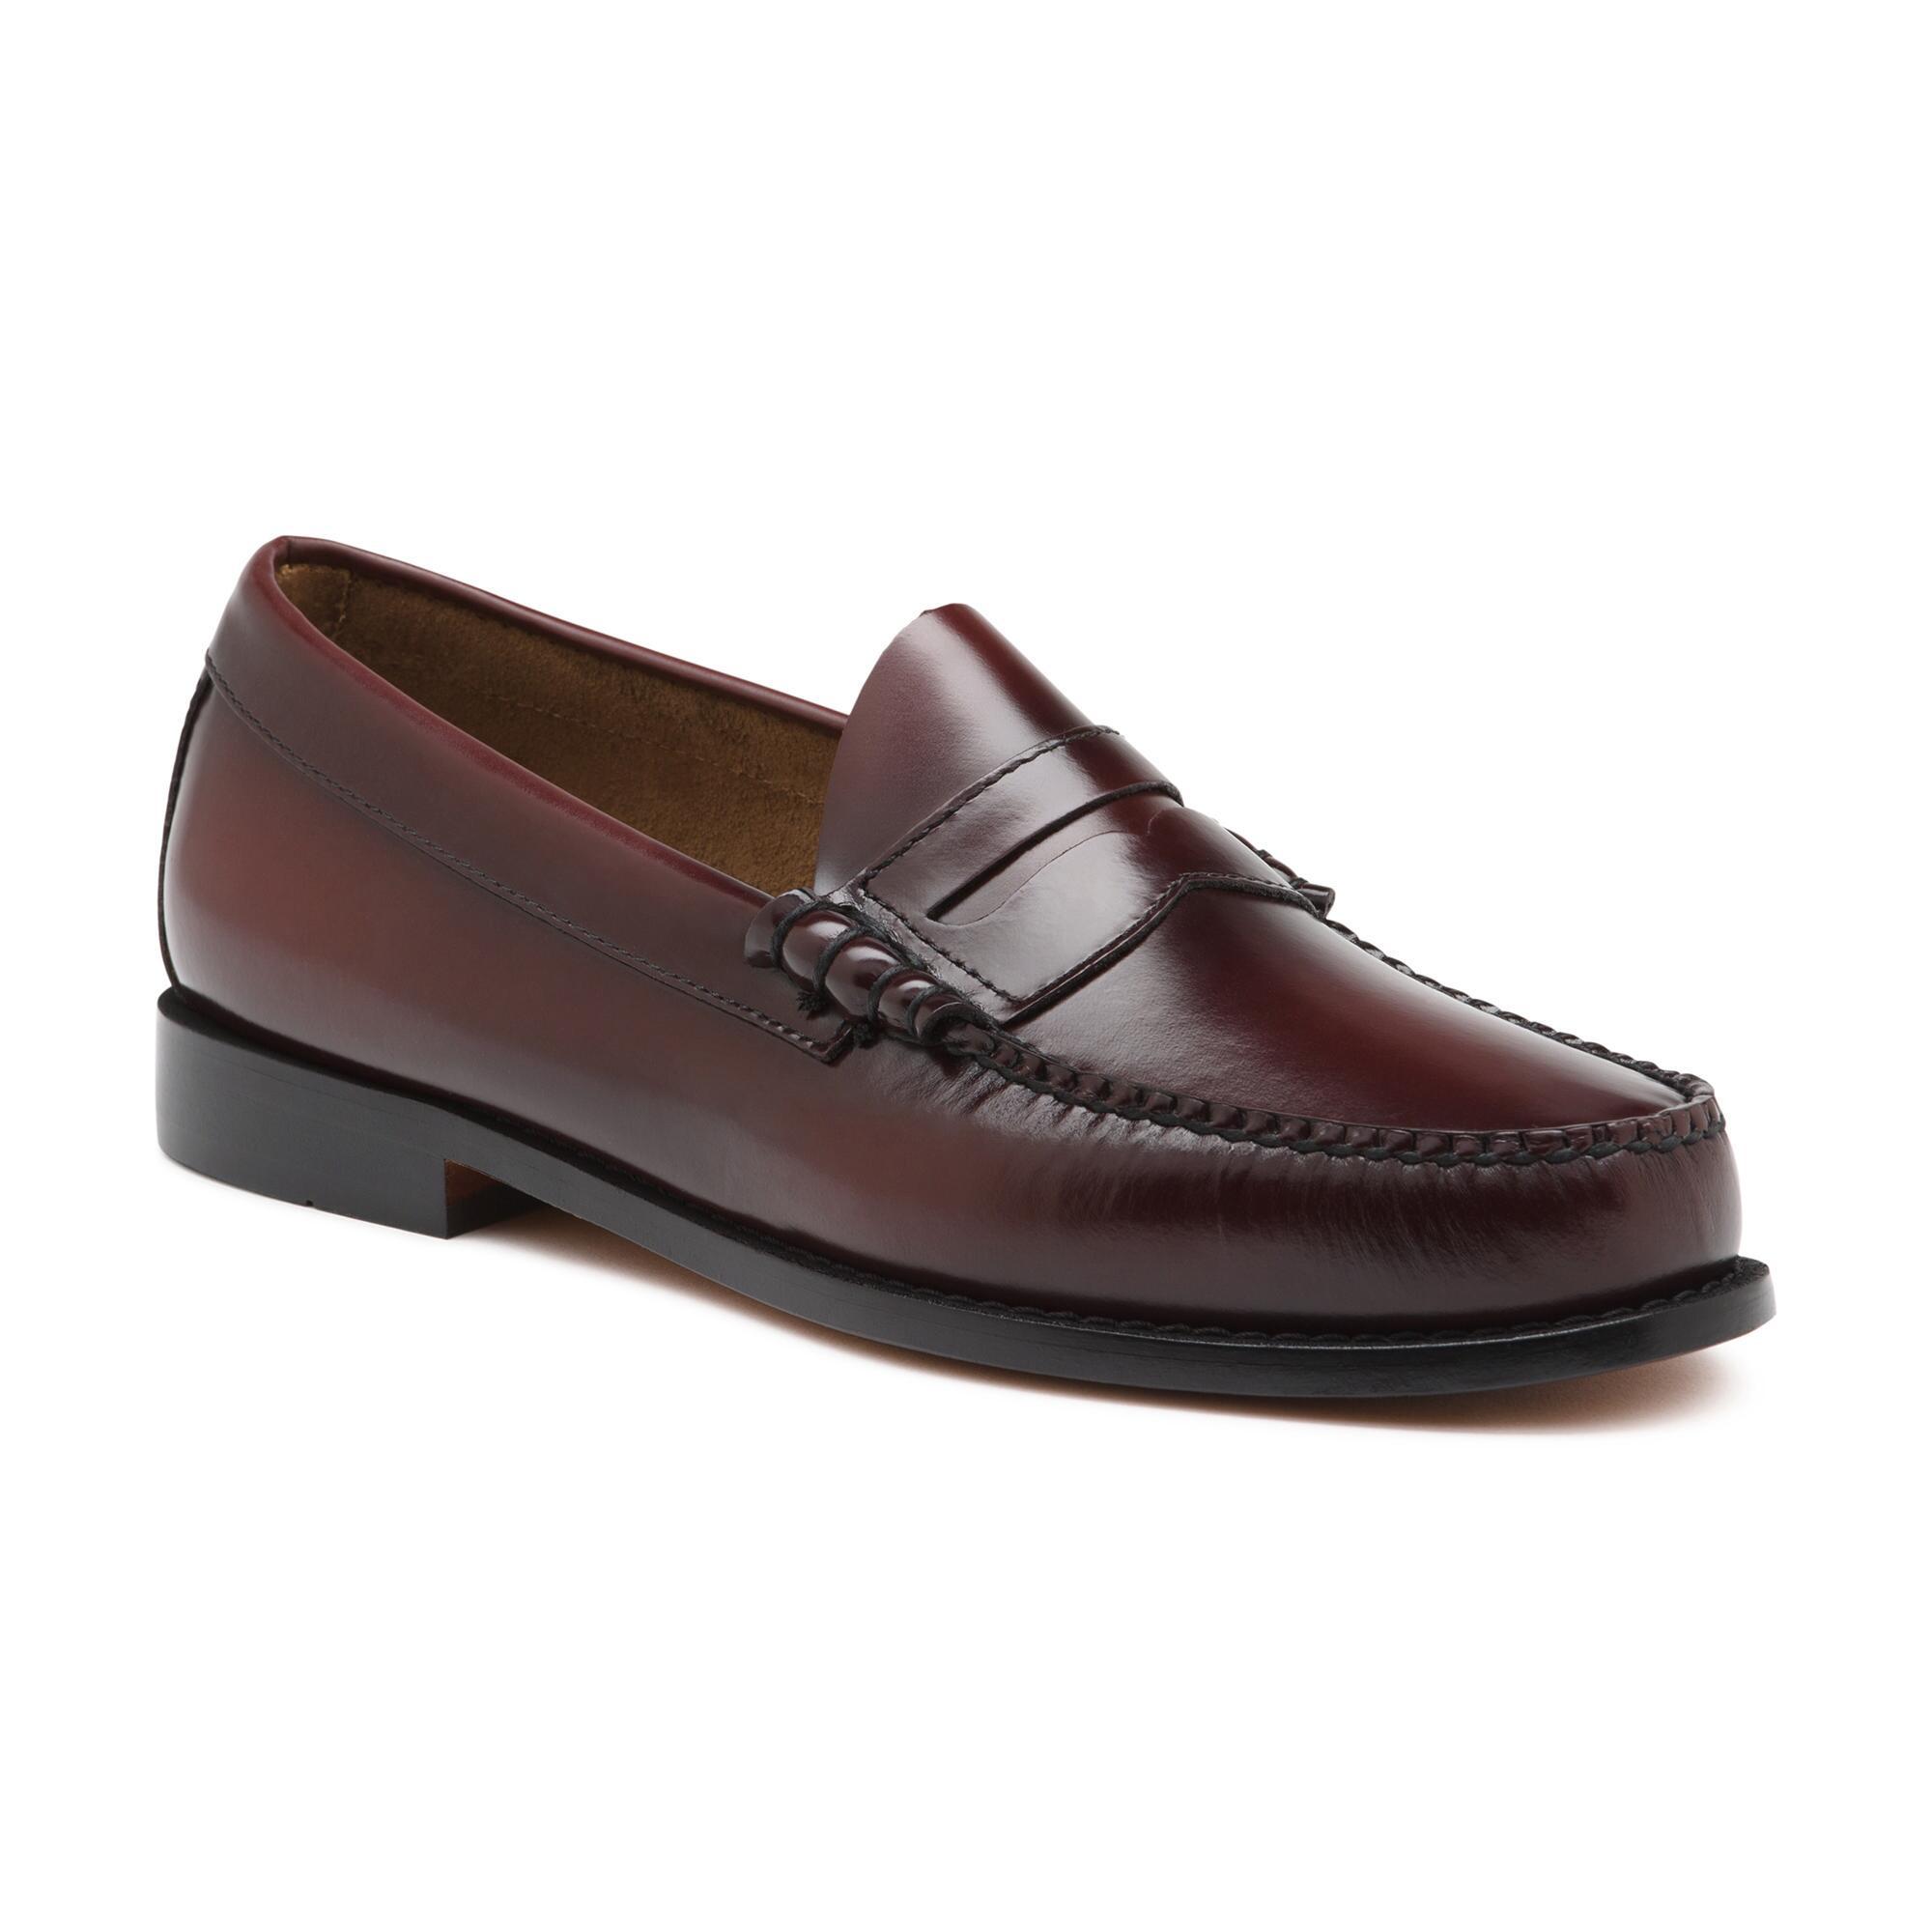 G.H.BASS Leather Bradford Penny Loafer in Burgundy (Purple) for Men - Lyst